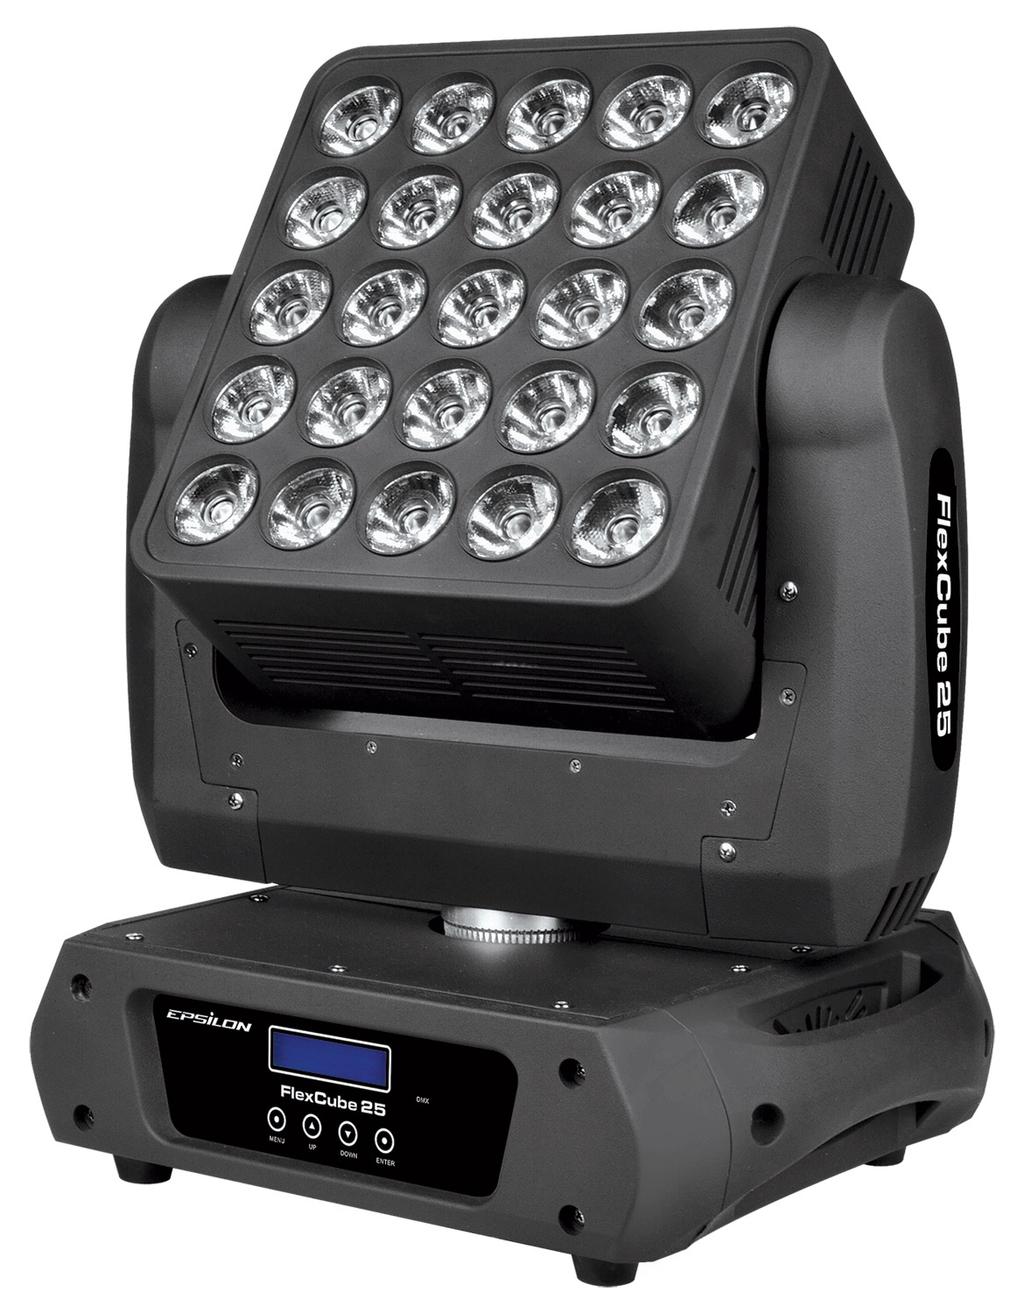 8 programmed shows that deliver professional performances. 5 (10 watt) LEDs CREE X-Lamp XM-L (4-IN-1) Red, Green, Blue, White Net Weight: 16.58 lbs / 7.